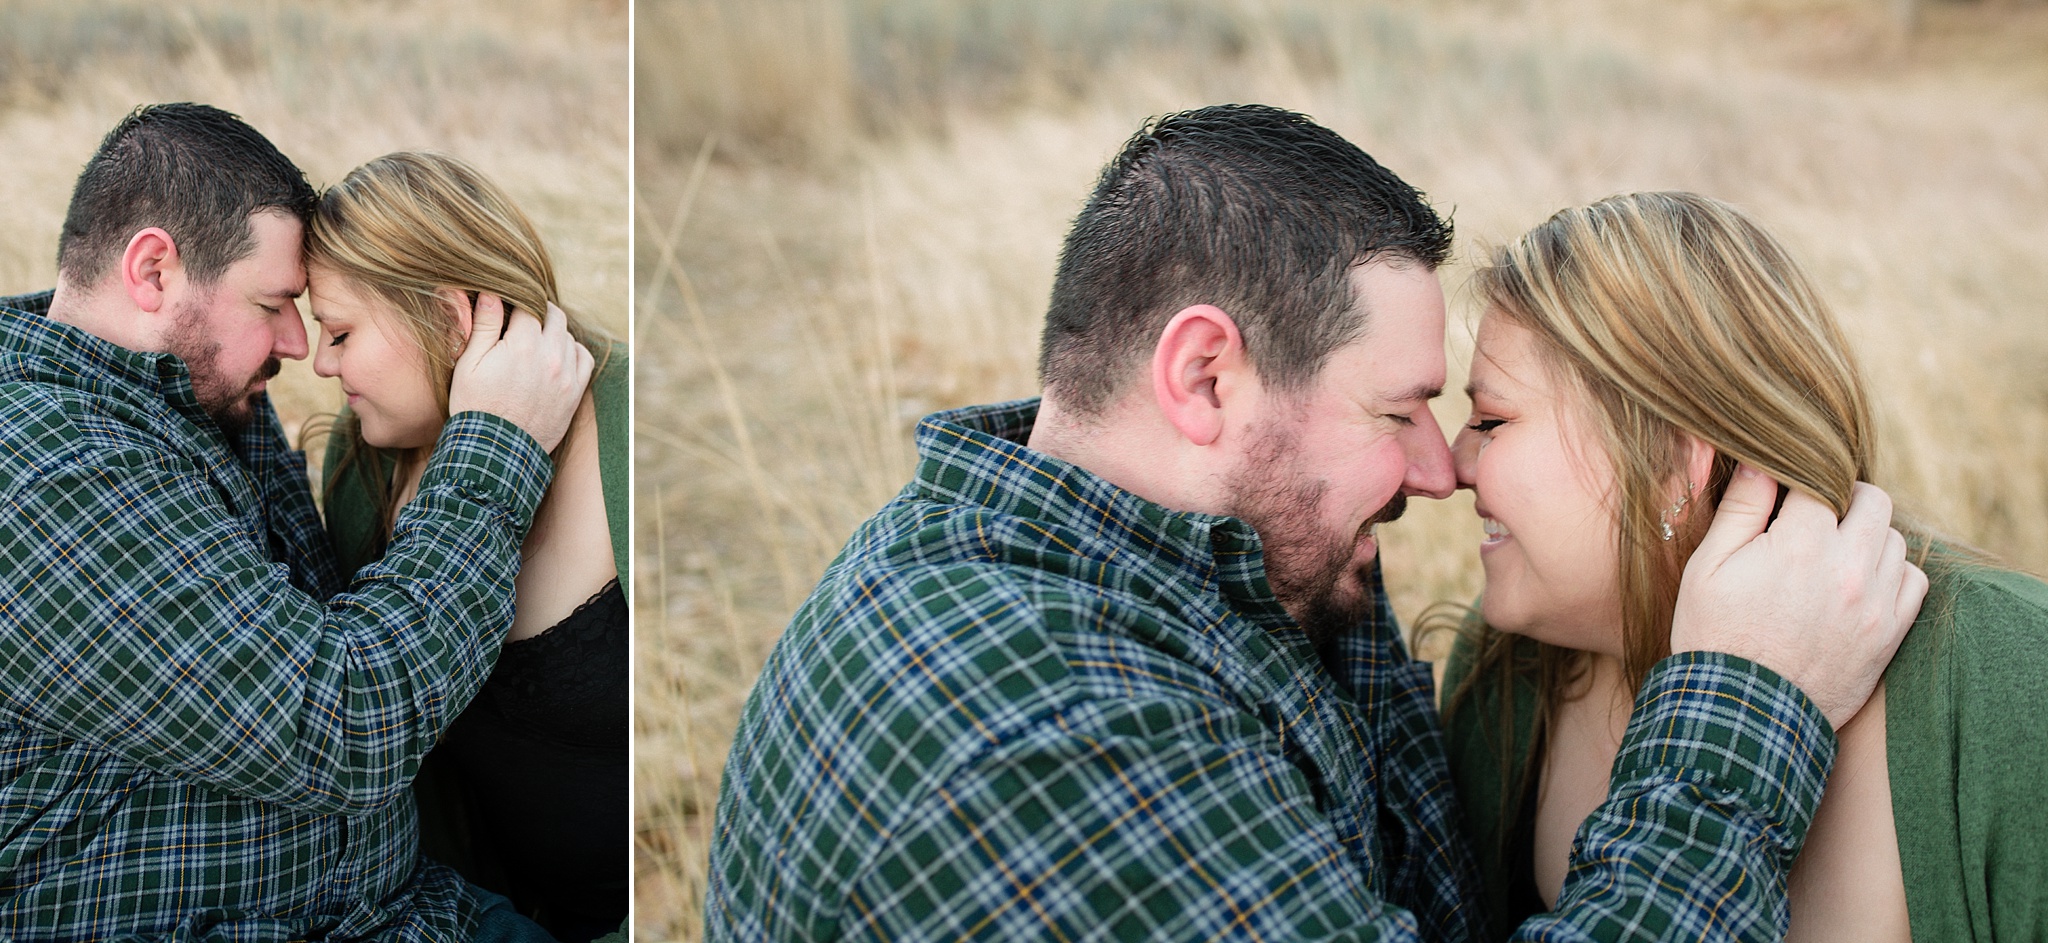 Couple embracing during their Devil’s Backbone engagement session. Briana & Kevin’s Devil’s Backbone and Sweetheart Lanes Engagement Session by Colorado Engagement Photographer, Jennifer Garza. Devil's Backbone Engagement, Devil's Backbone Engagement Session, Loveland Engagement Session, Colorado Engagement Photography, Colorado Engagement Photos, Sweetheart Lanes Bowling Alley, Bowling Alley Engagement, Bowling Engagement Session, Bowling Engagement Photography, Wedding Inspo, Colorado Wedding, Colorado Bride, Brides of Colorado, Bride to Be, Couples Goals